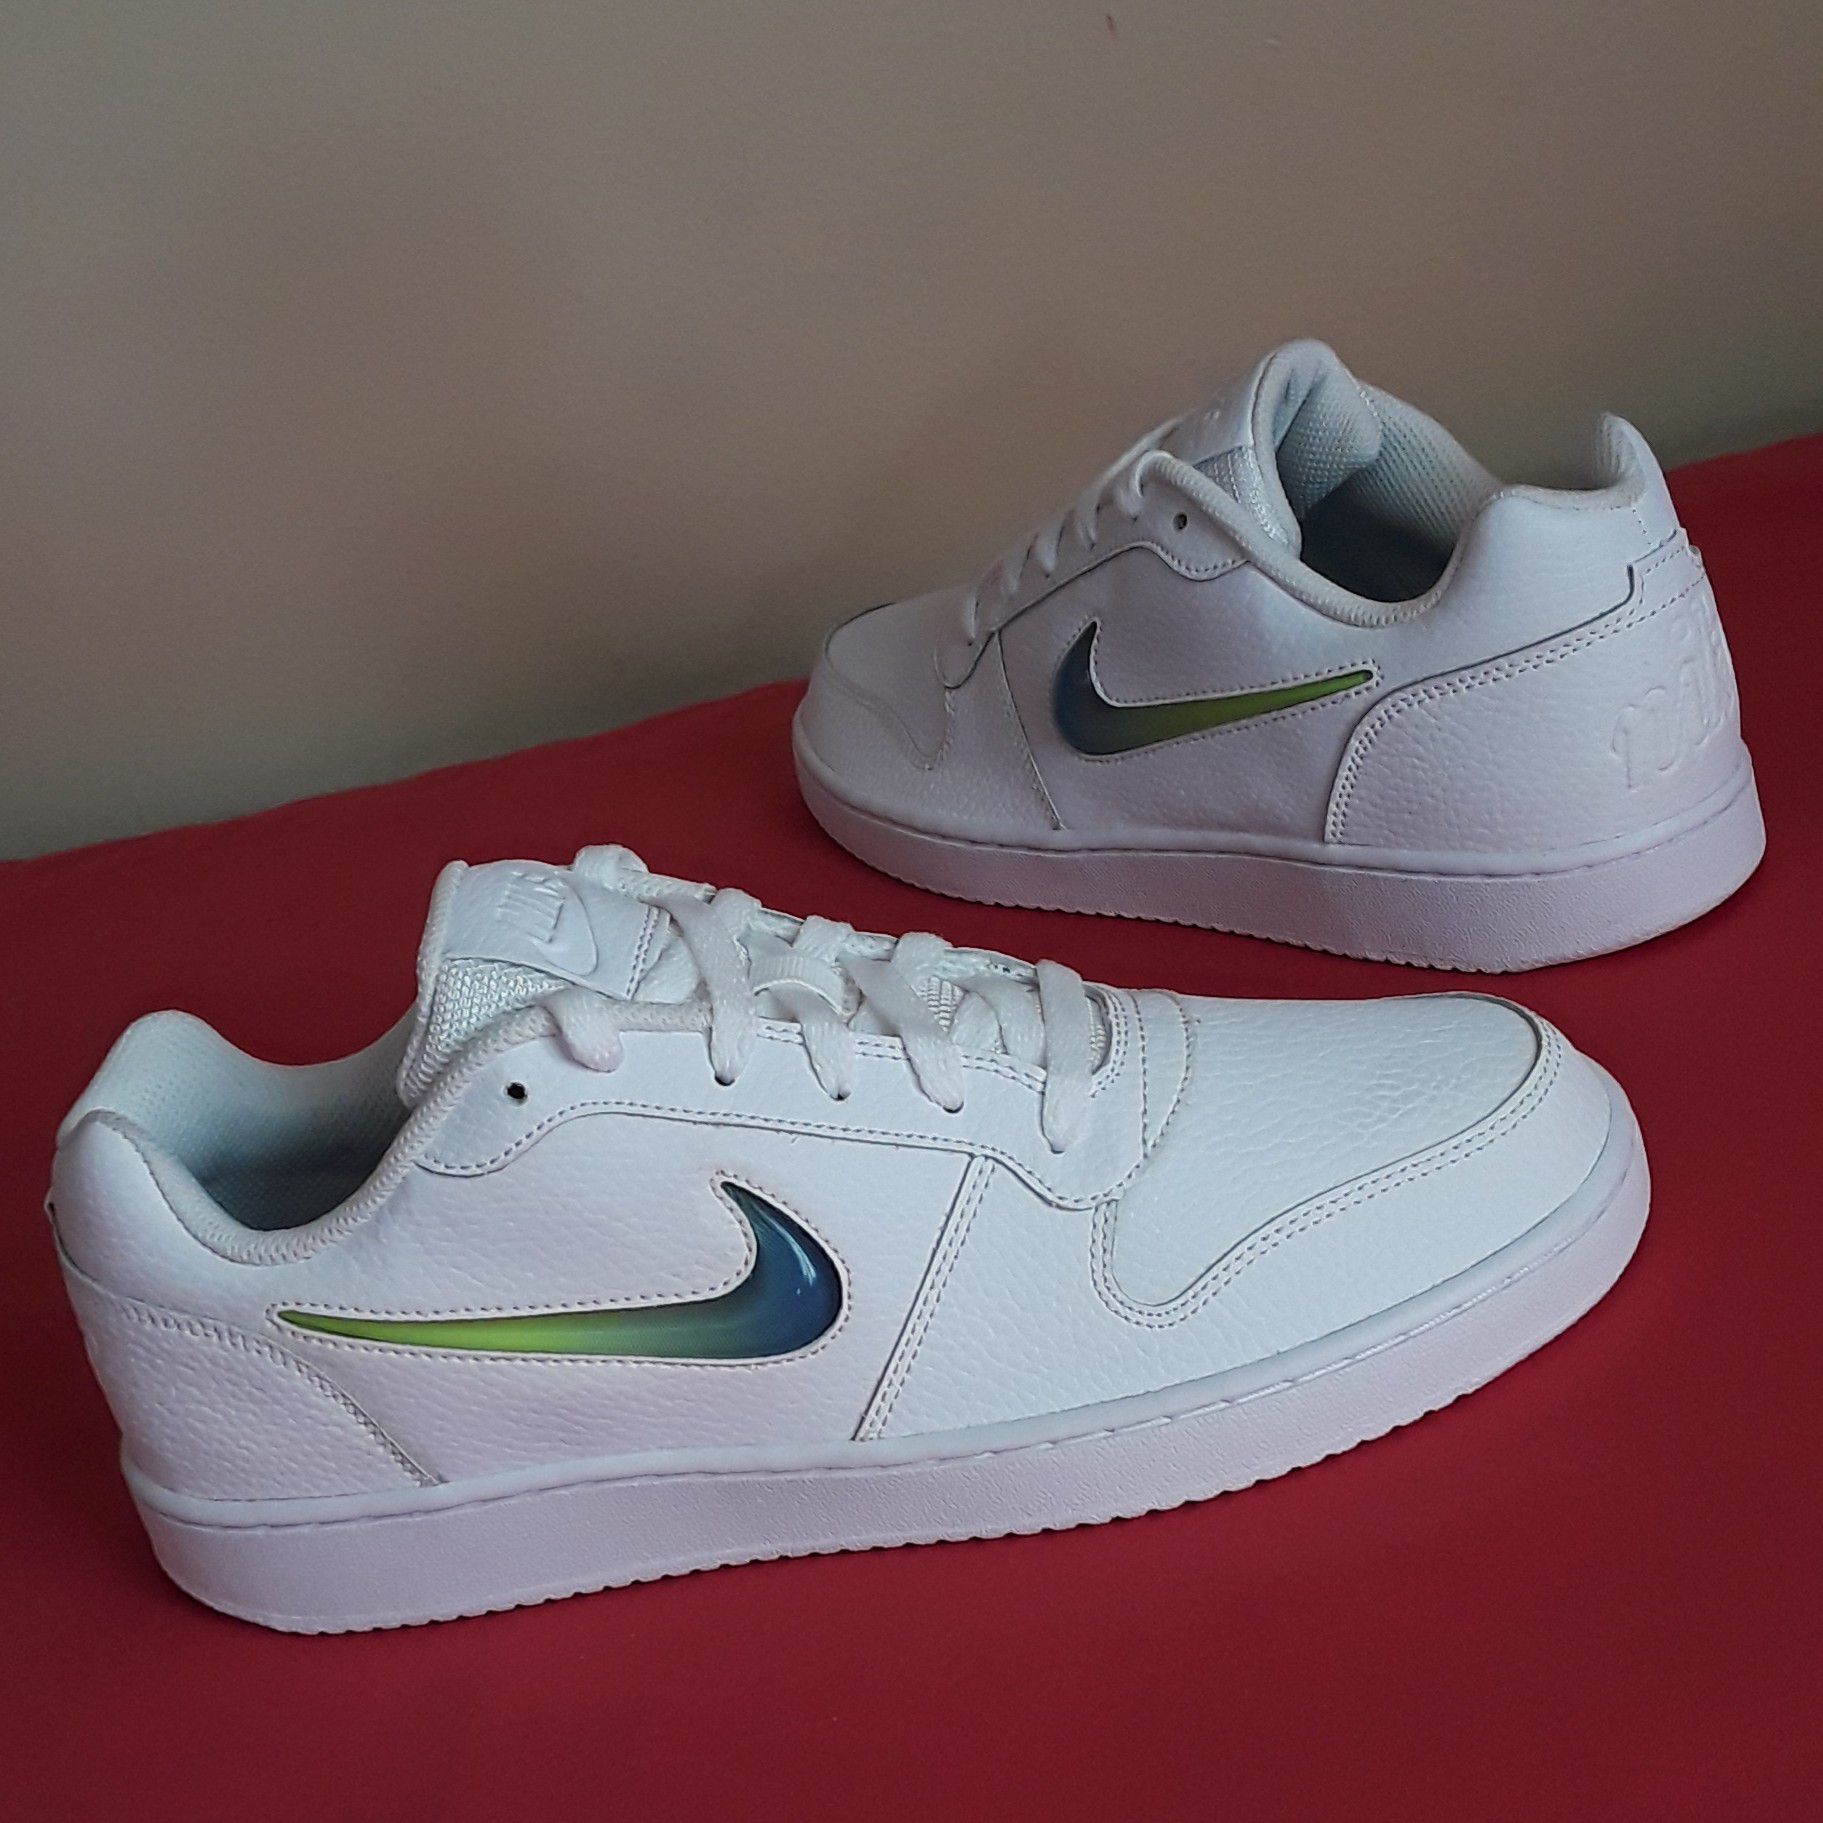 NEW Nike White Leather Low Size 9 MEN or 10.5 WOMEN